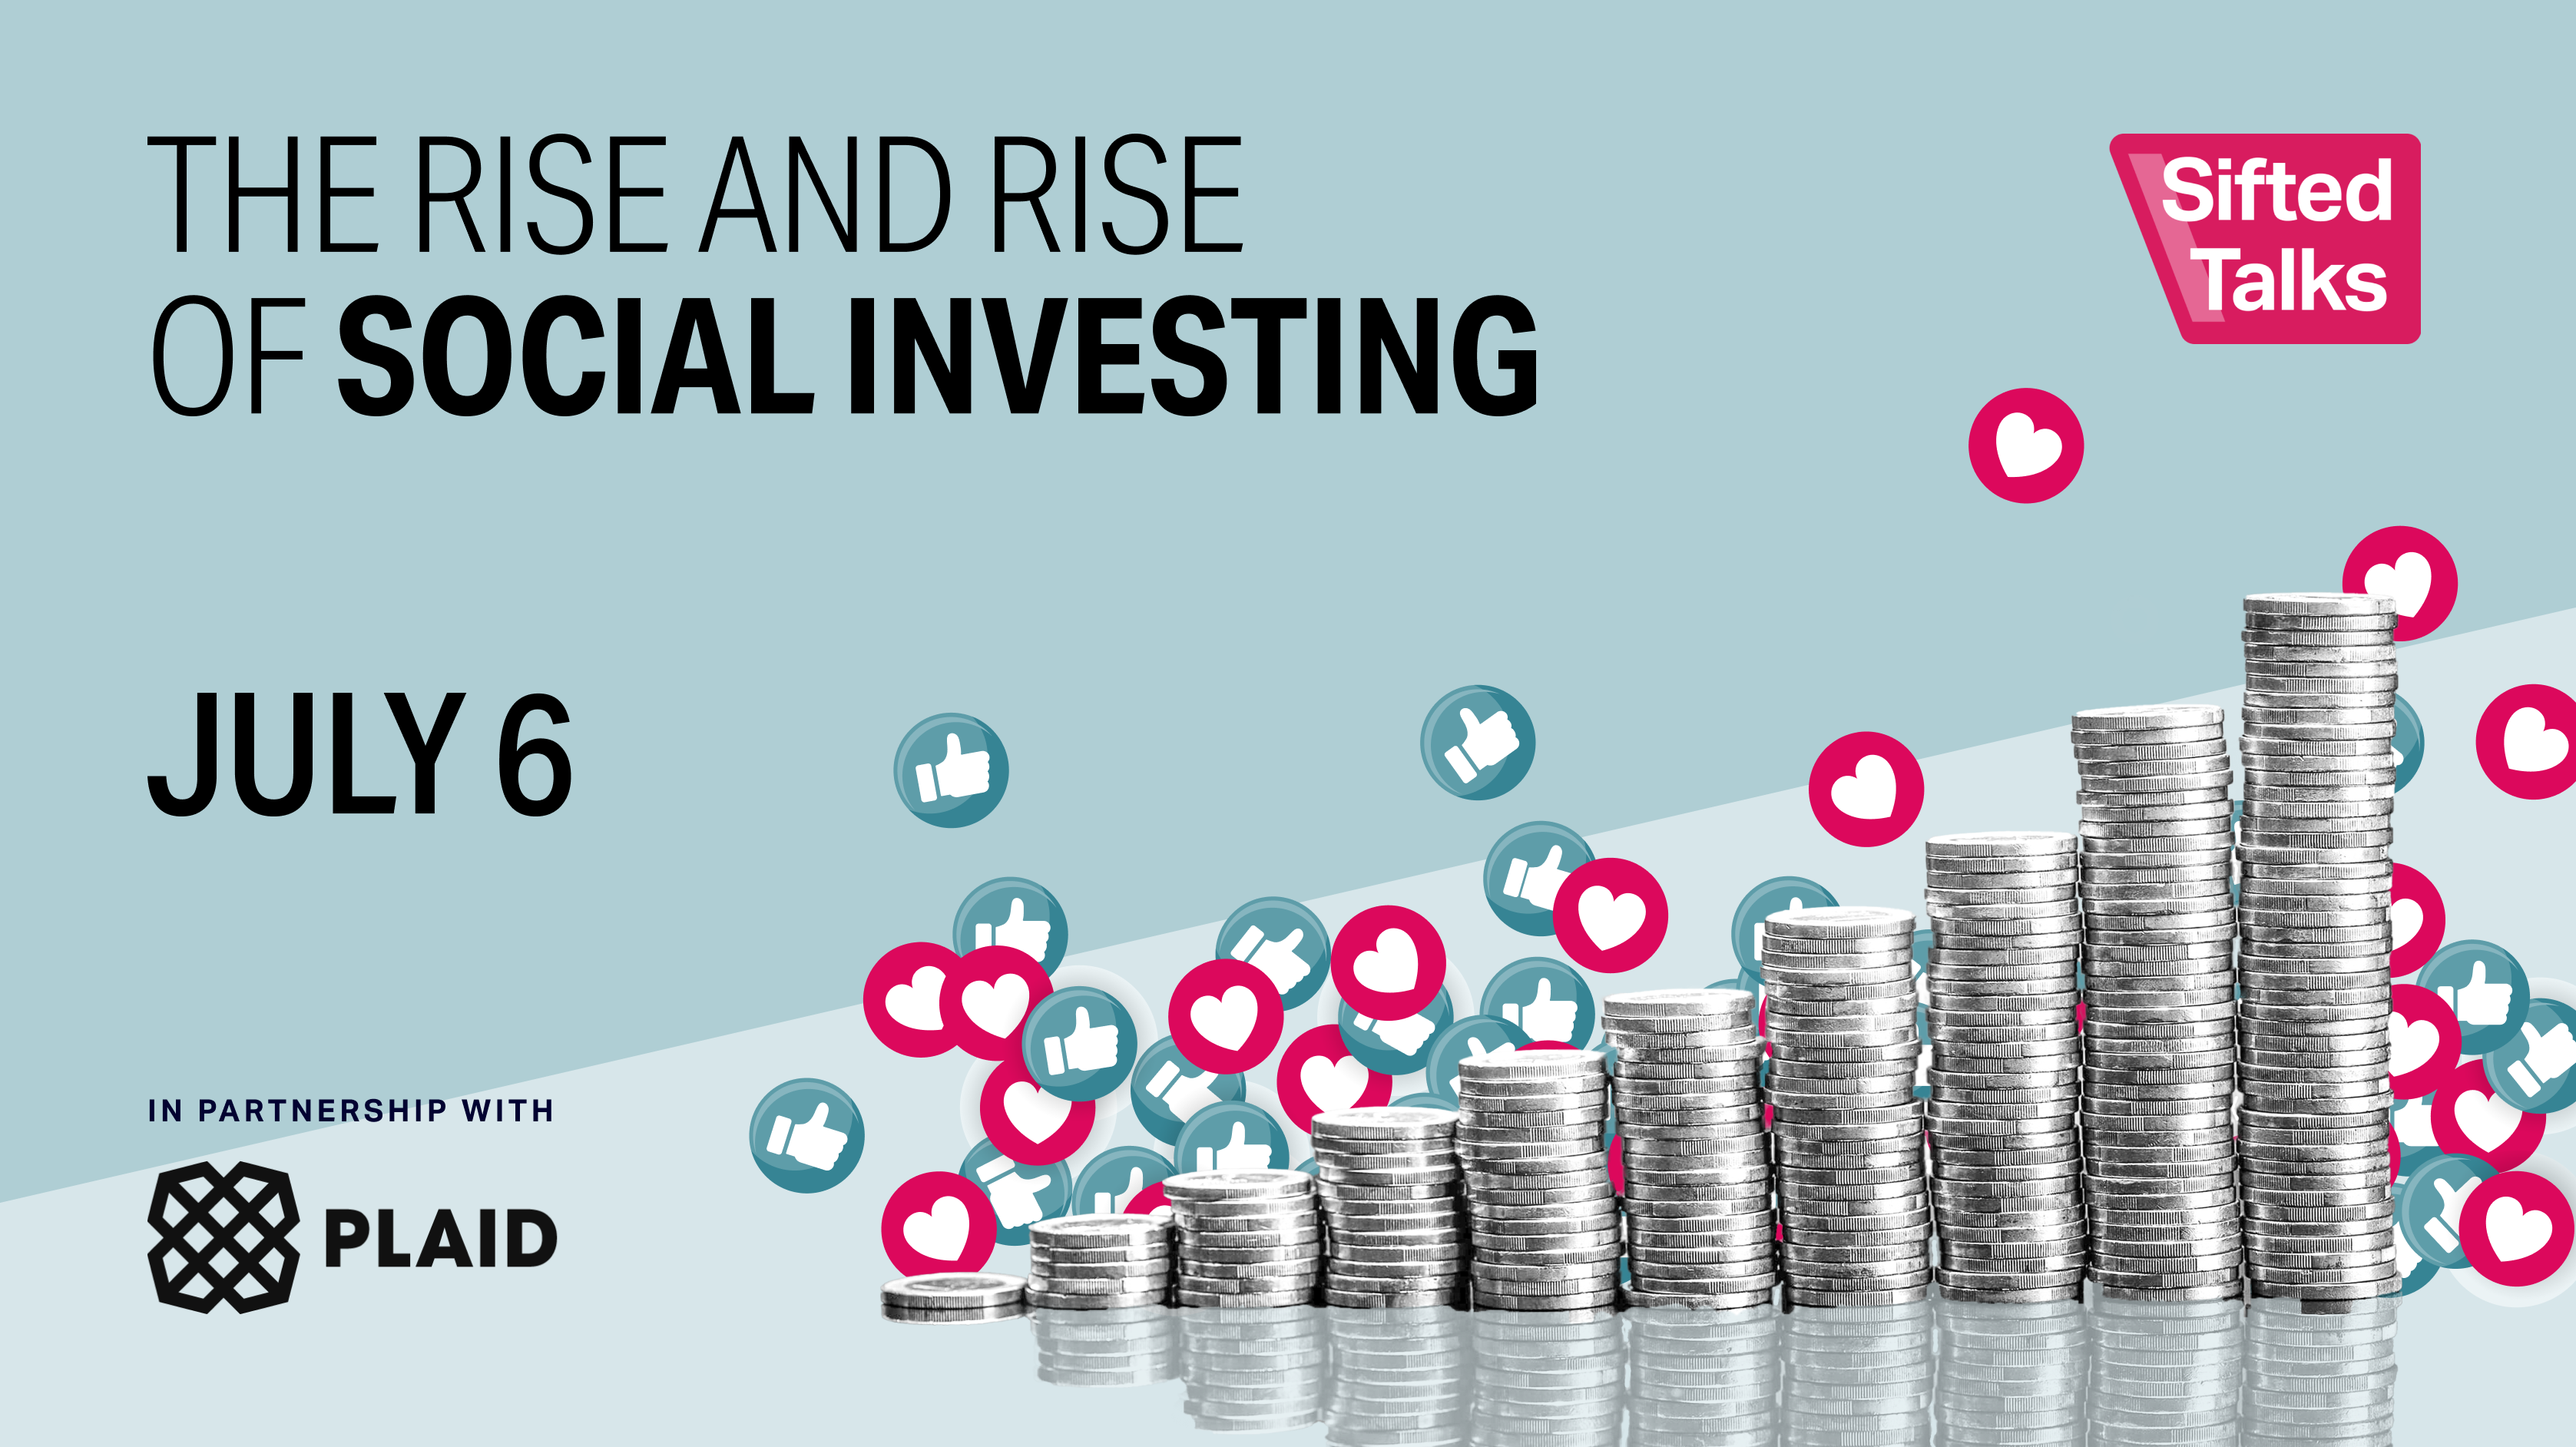 The rise and rise of social investing: You are what you digitally invest in